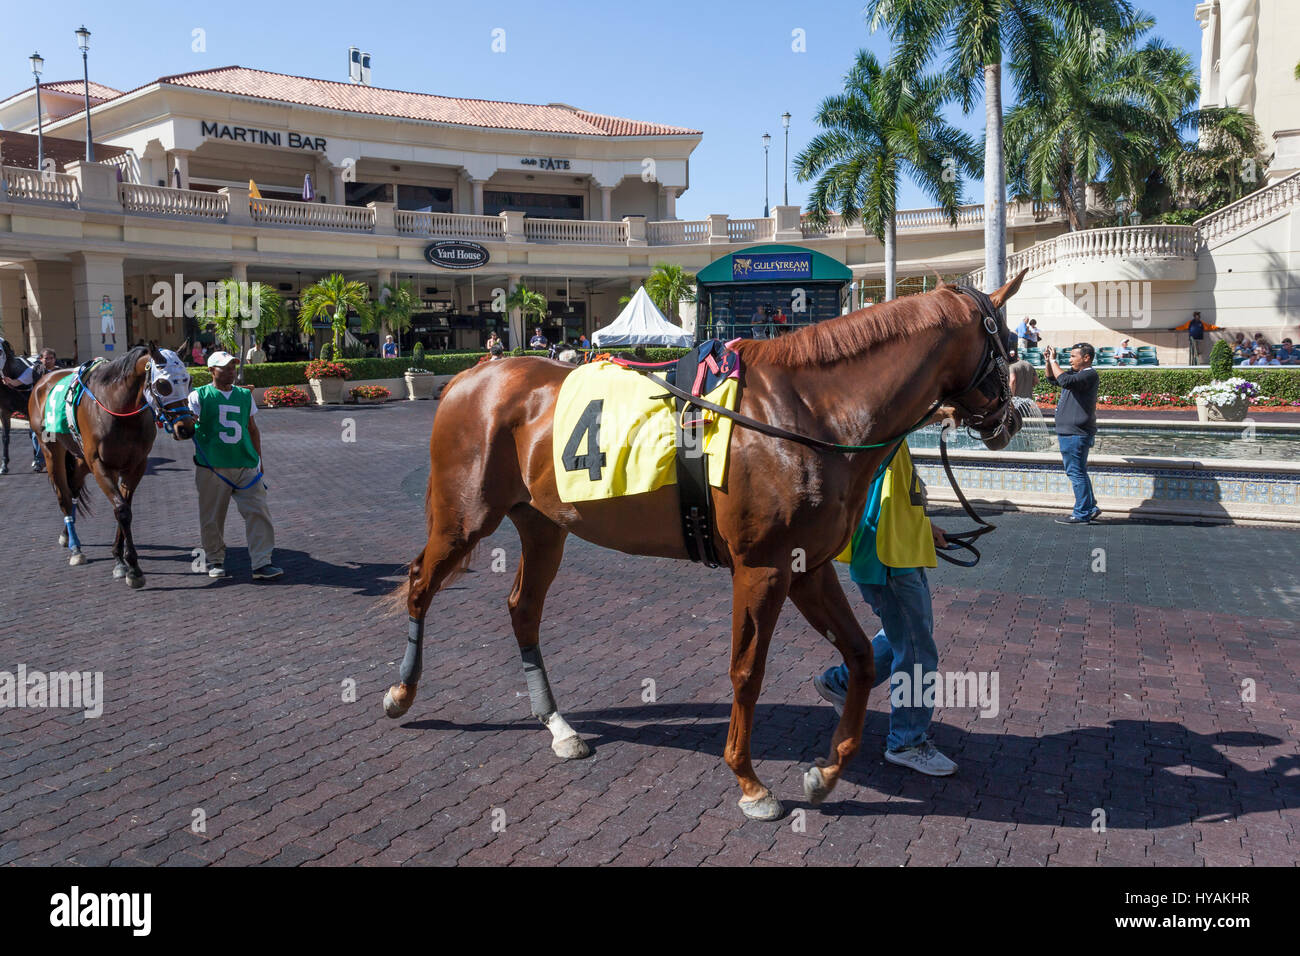 HALLANDALE BEACH, USA - MAR 11, 2017: Racing horses at the Gulfstream Park race track in Hallandale Beach, Florida, United States Stock Photo